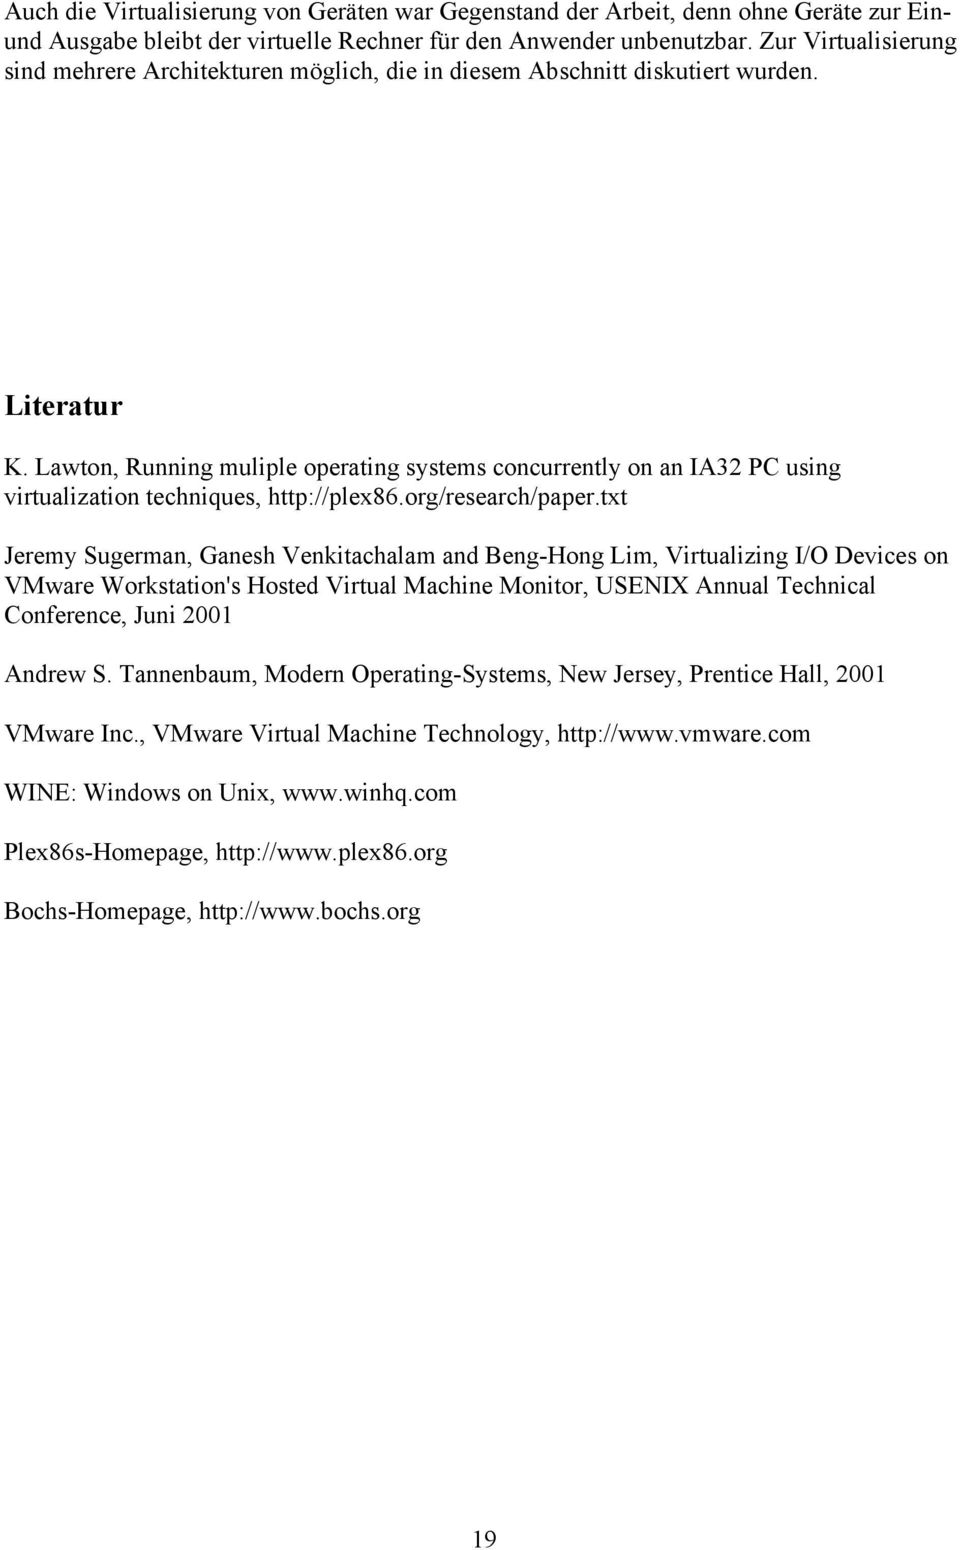 Lawton, Running muliple operating systems concurrently on an IA32 PC using virtualization techniques, http://plex86.org/research/paper.